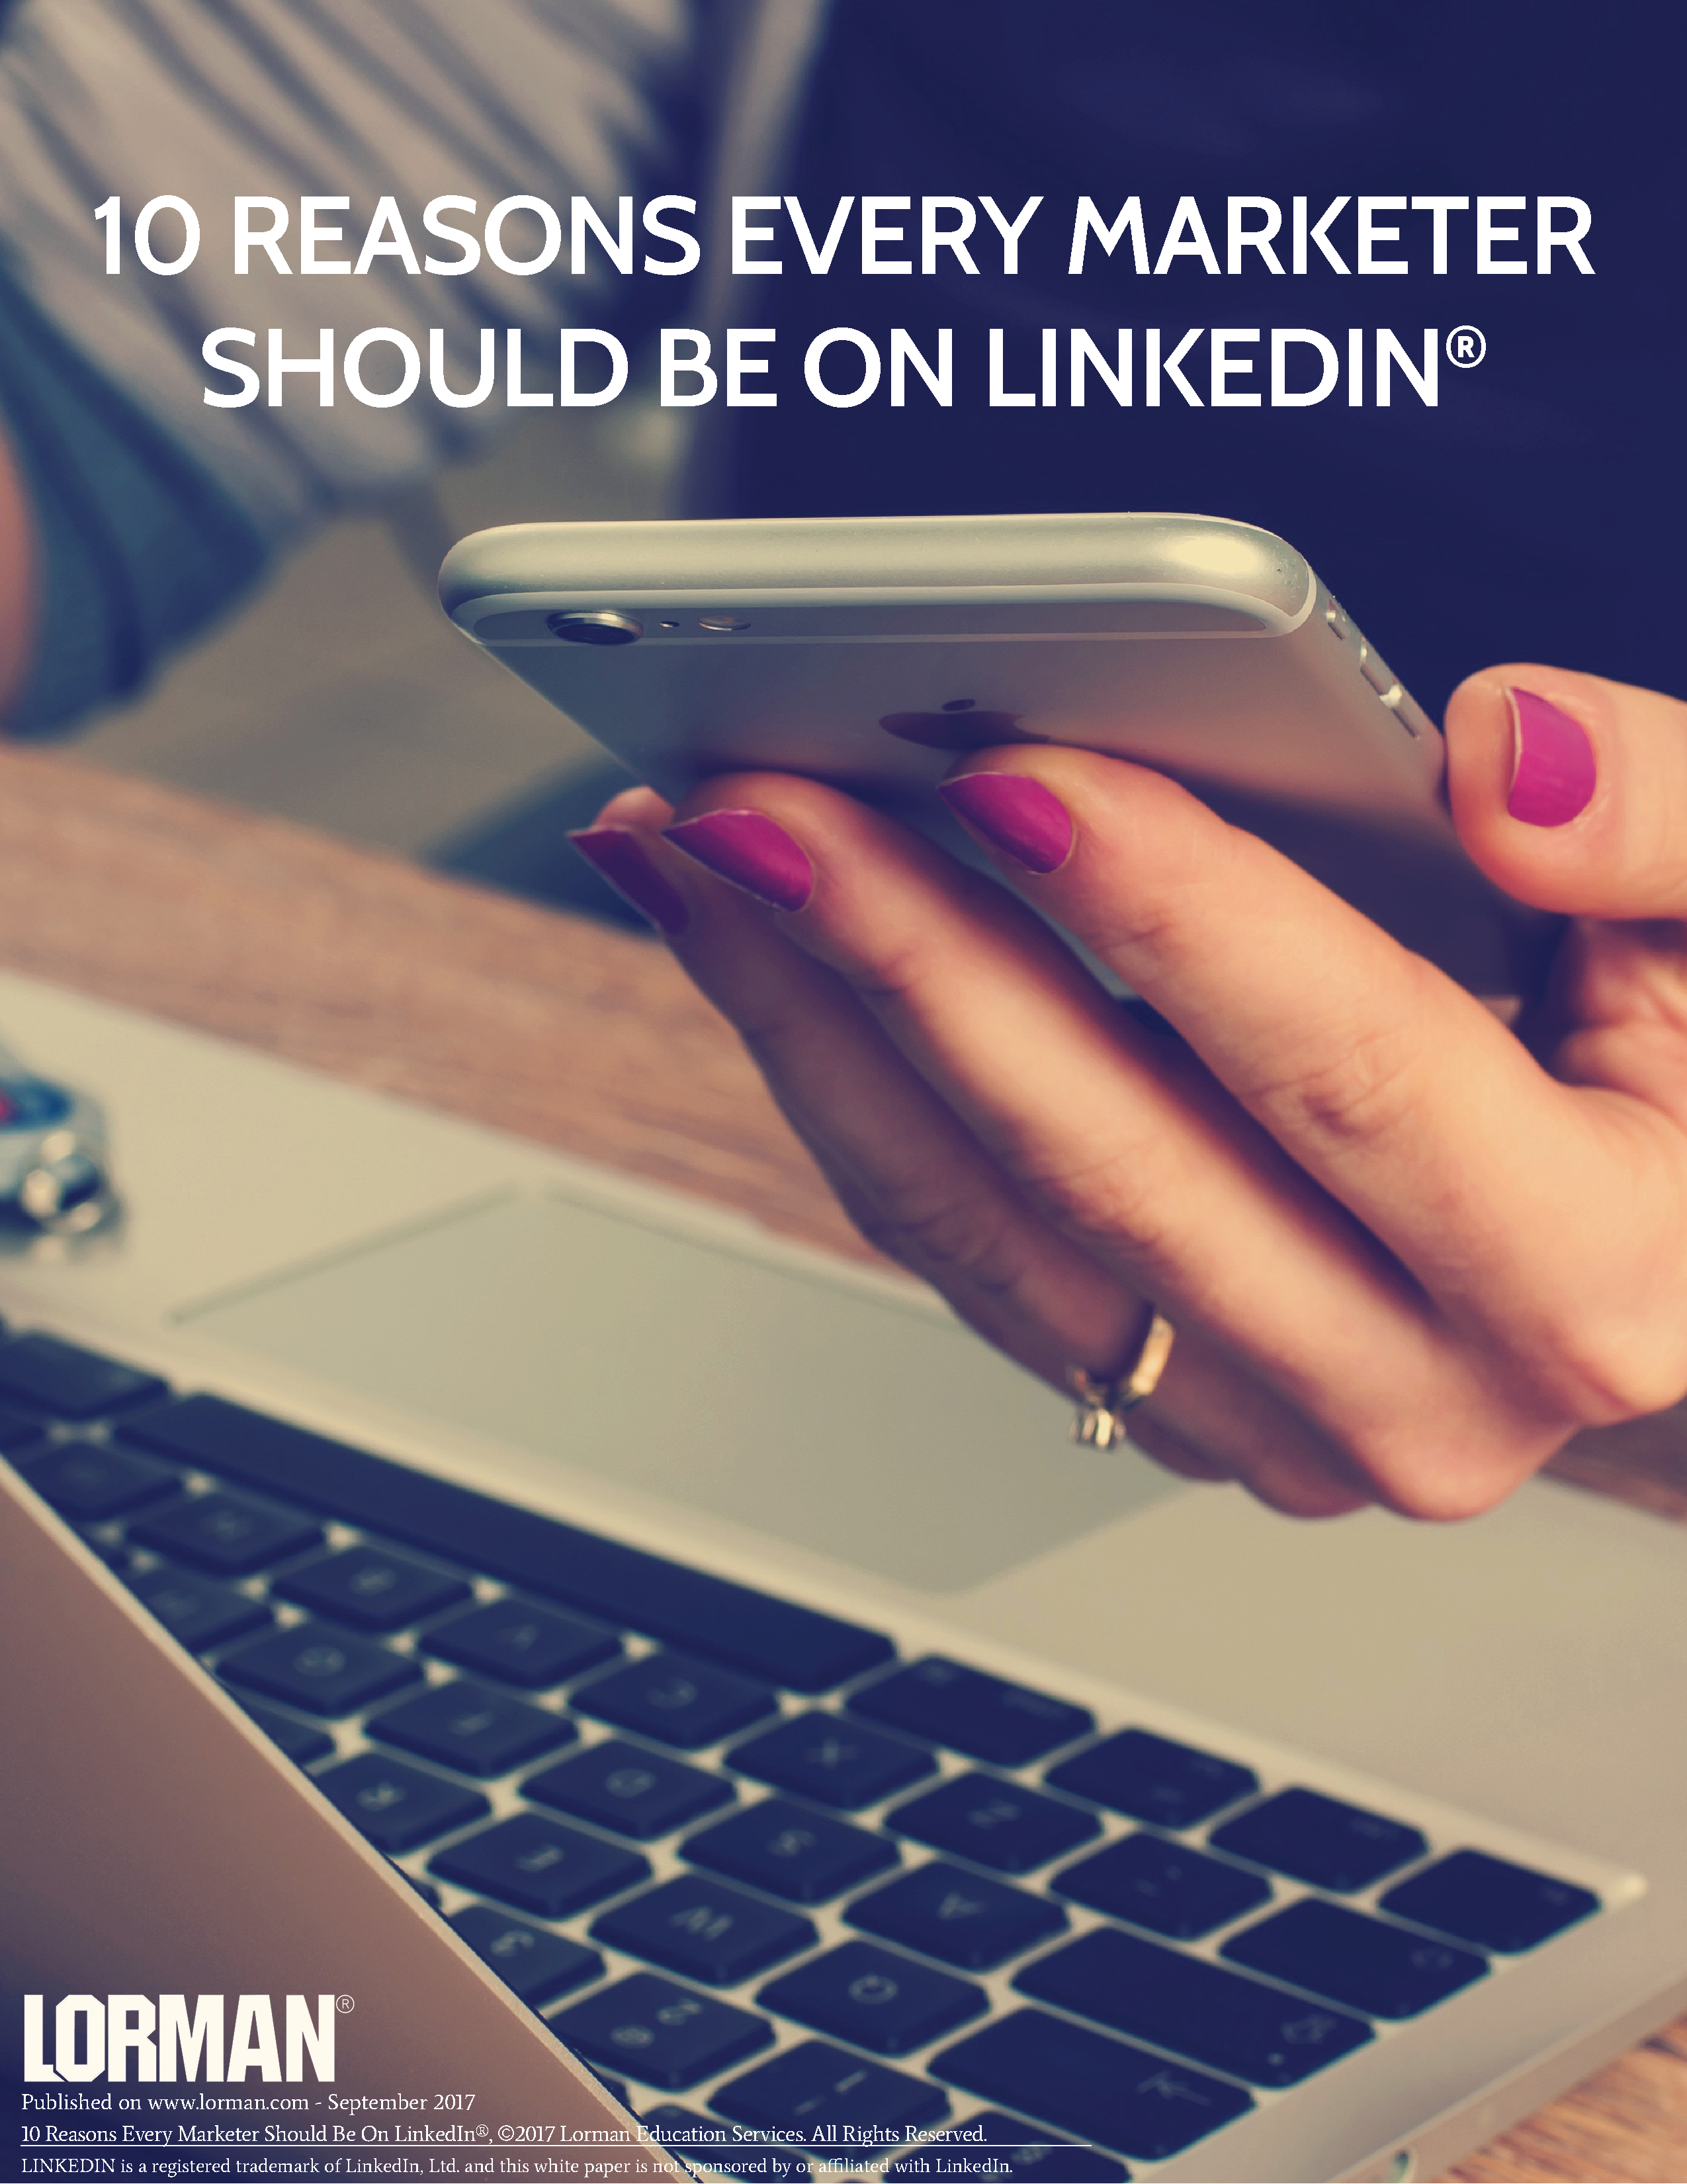 10 Reasons Every Marketer Should Be On LinkedIn®